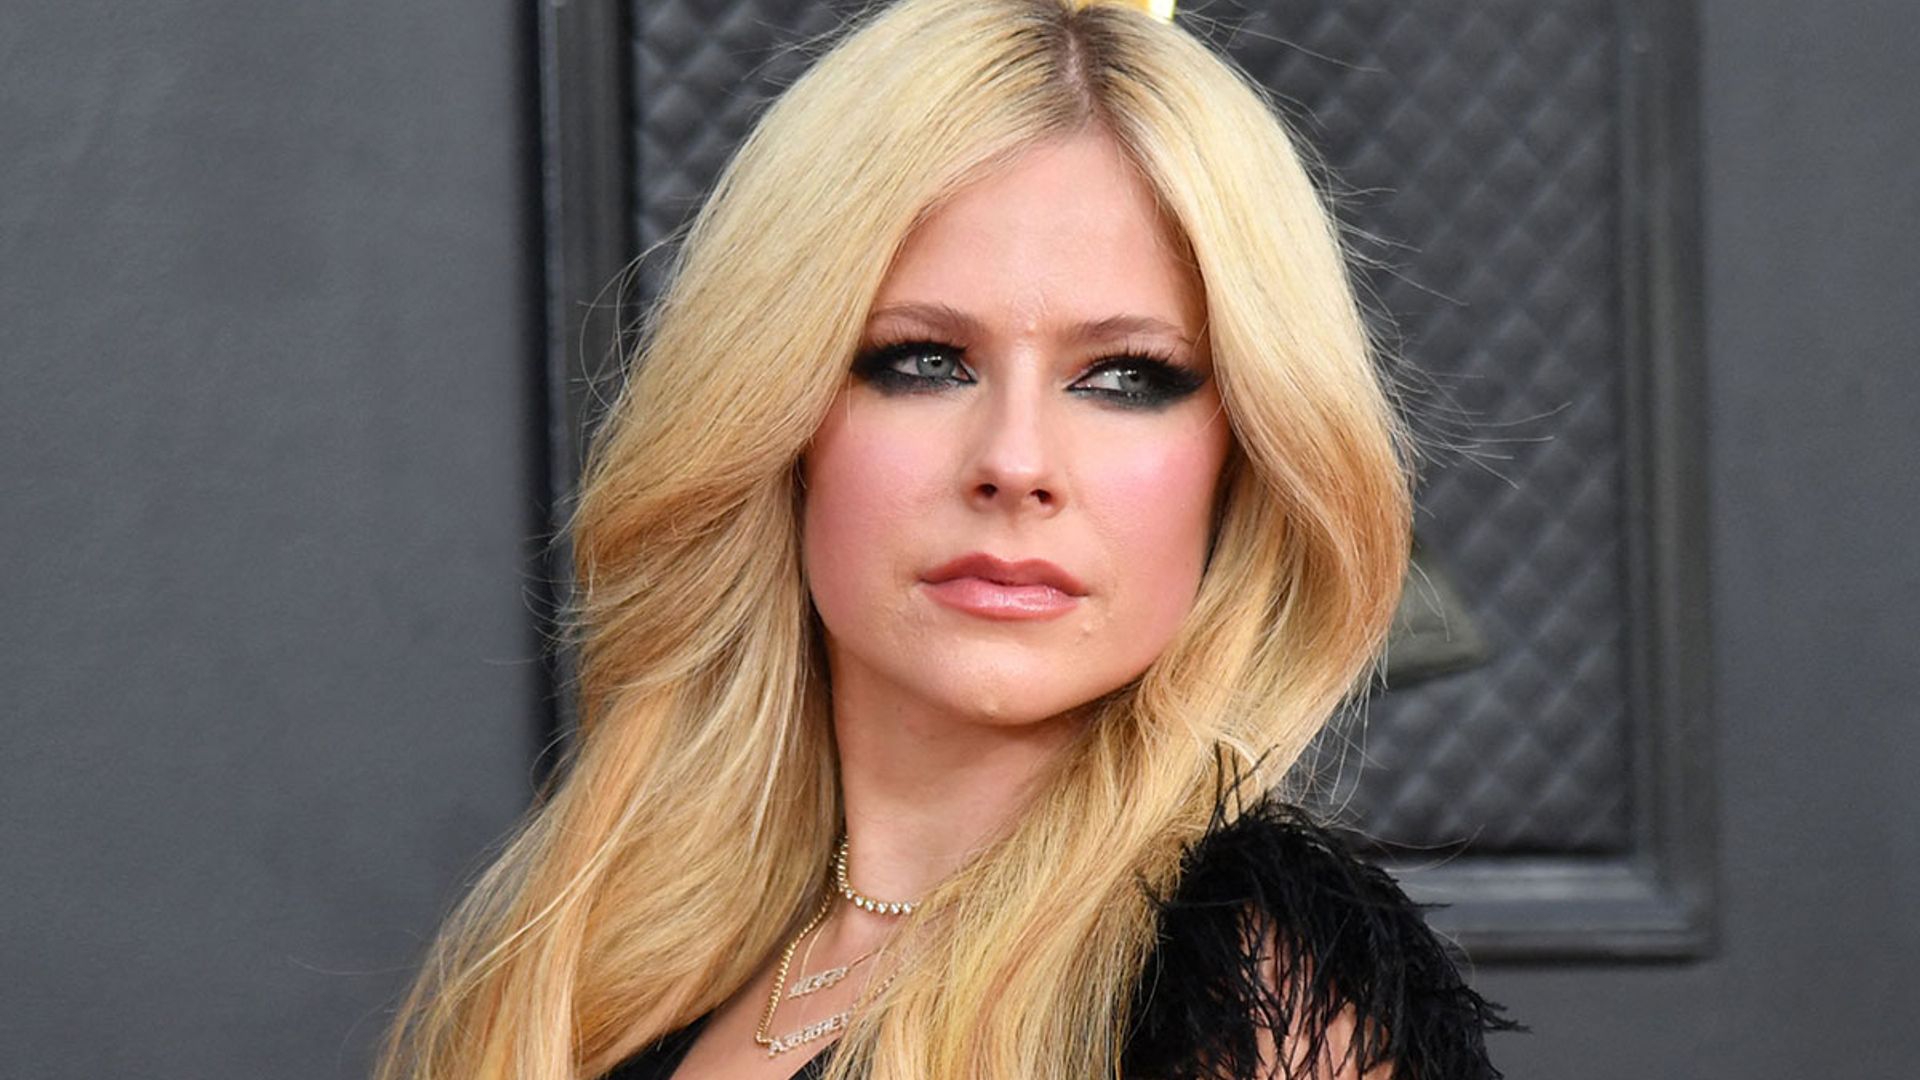 Avril Lavigne stuns in unexpected legbaring dress for Grammys comeback